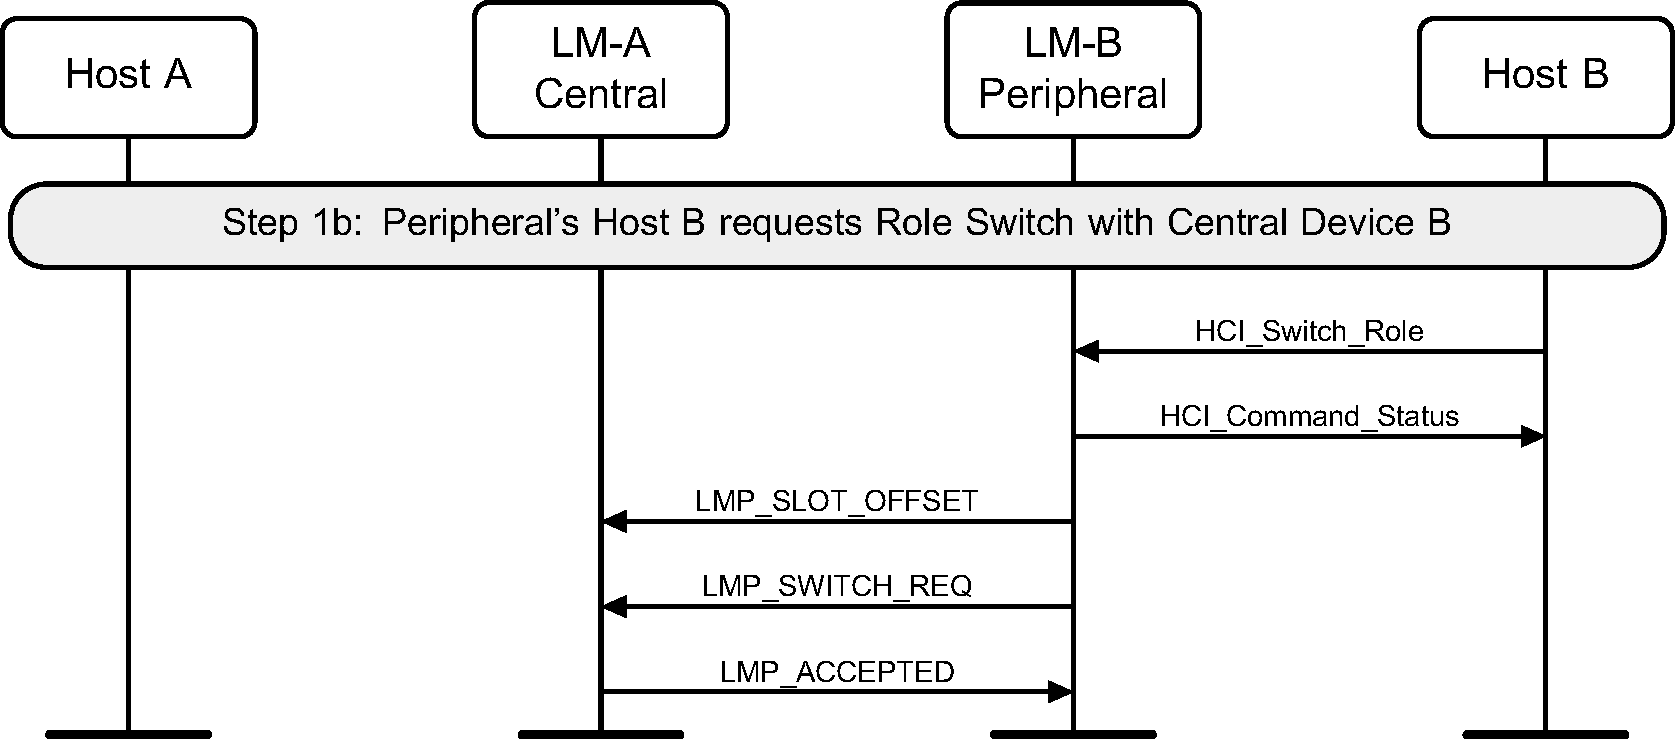 Peripheral requests role switch